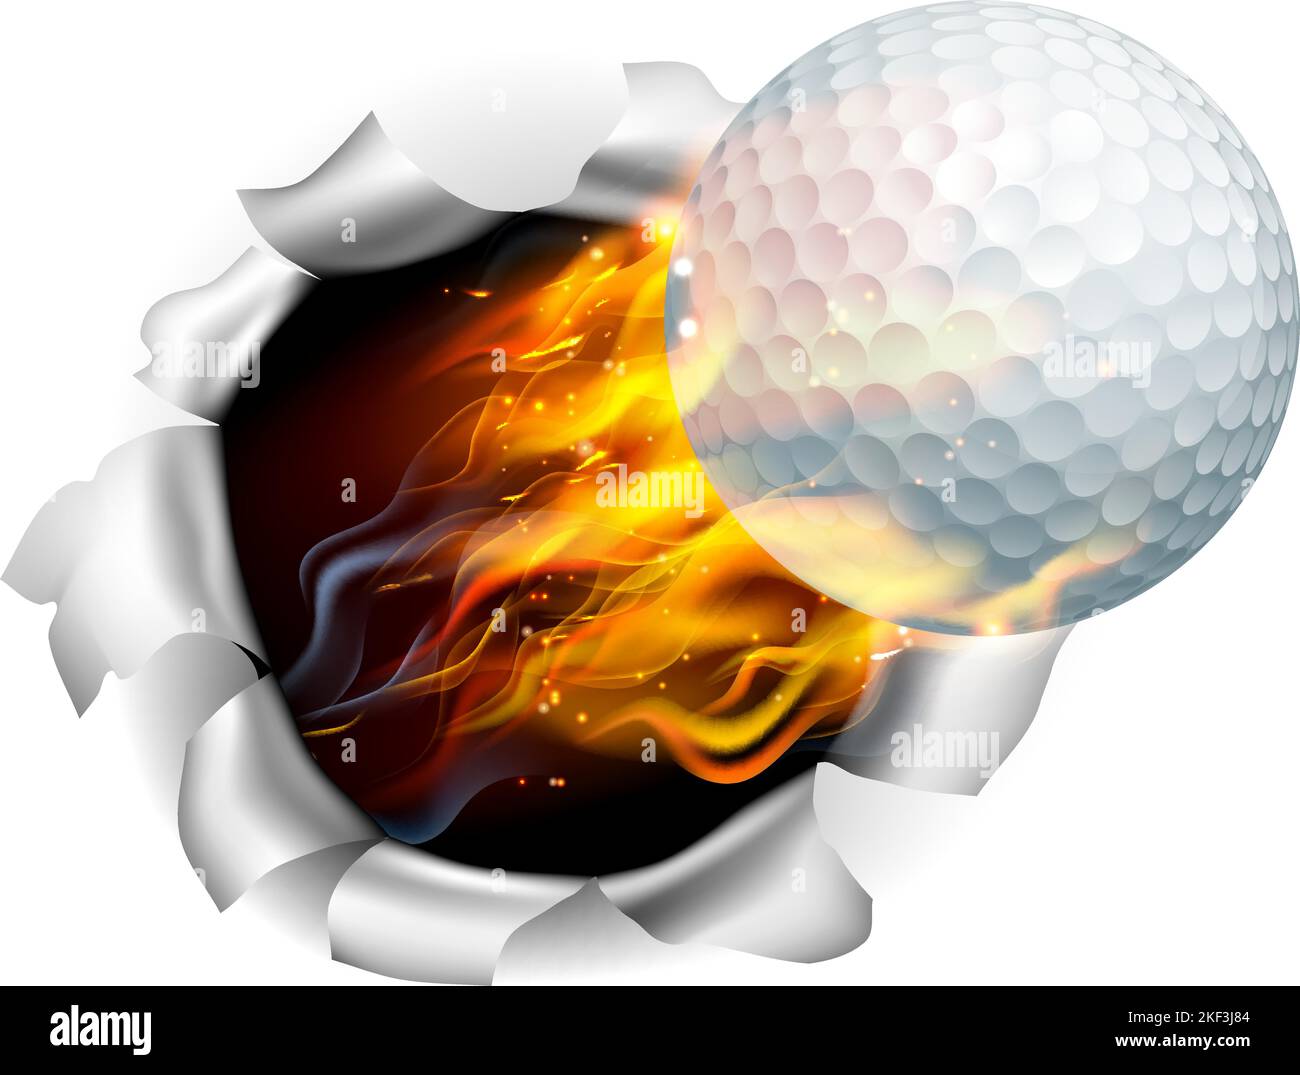 Golf Ball Flame Fire Breaking Background Stock Vector